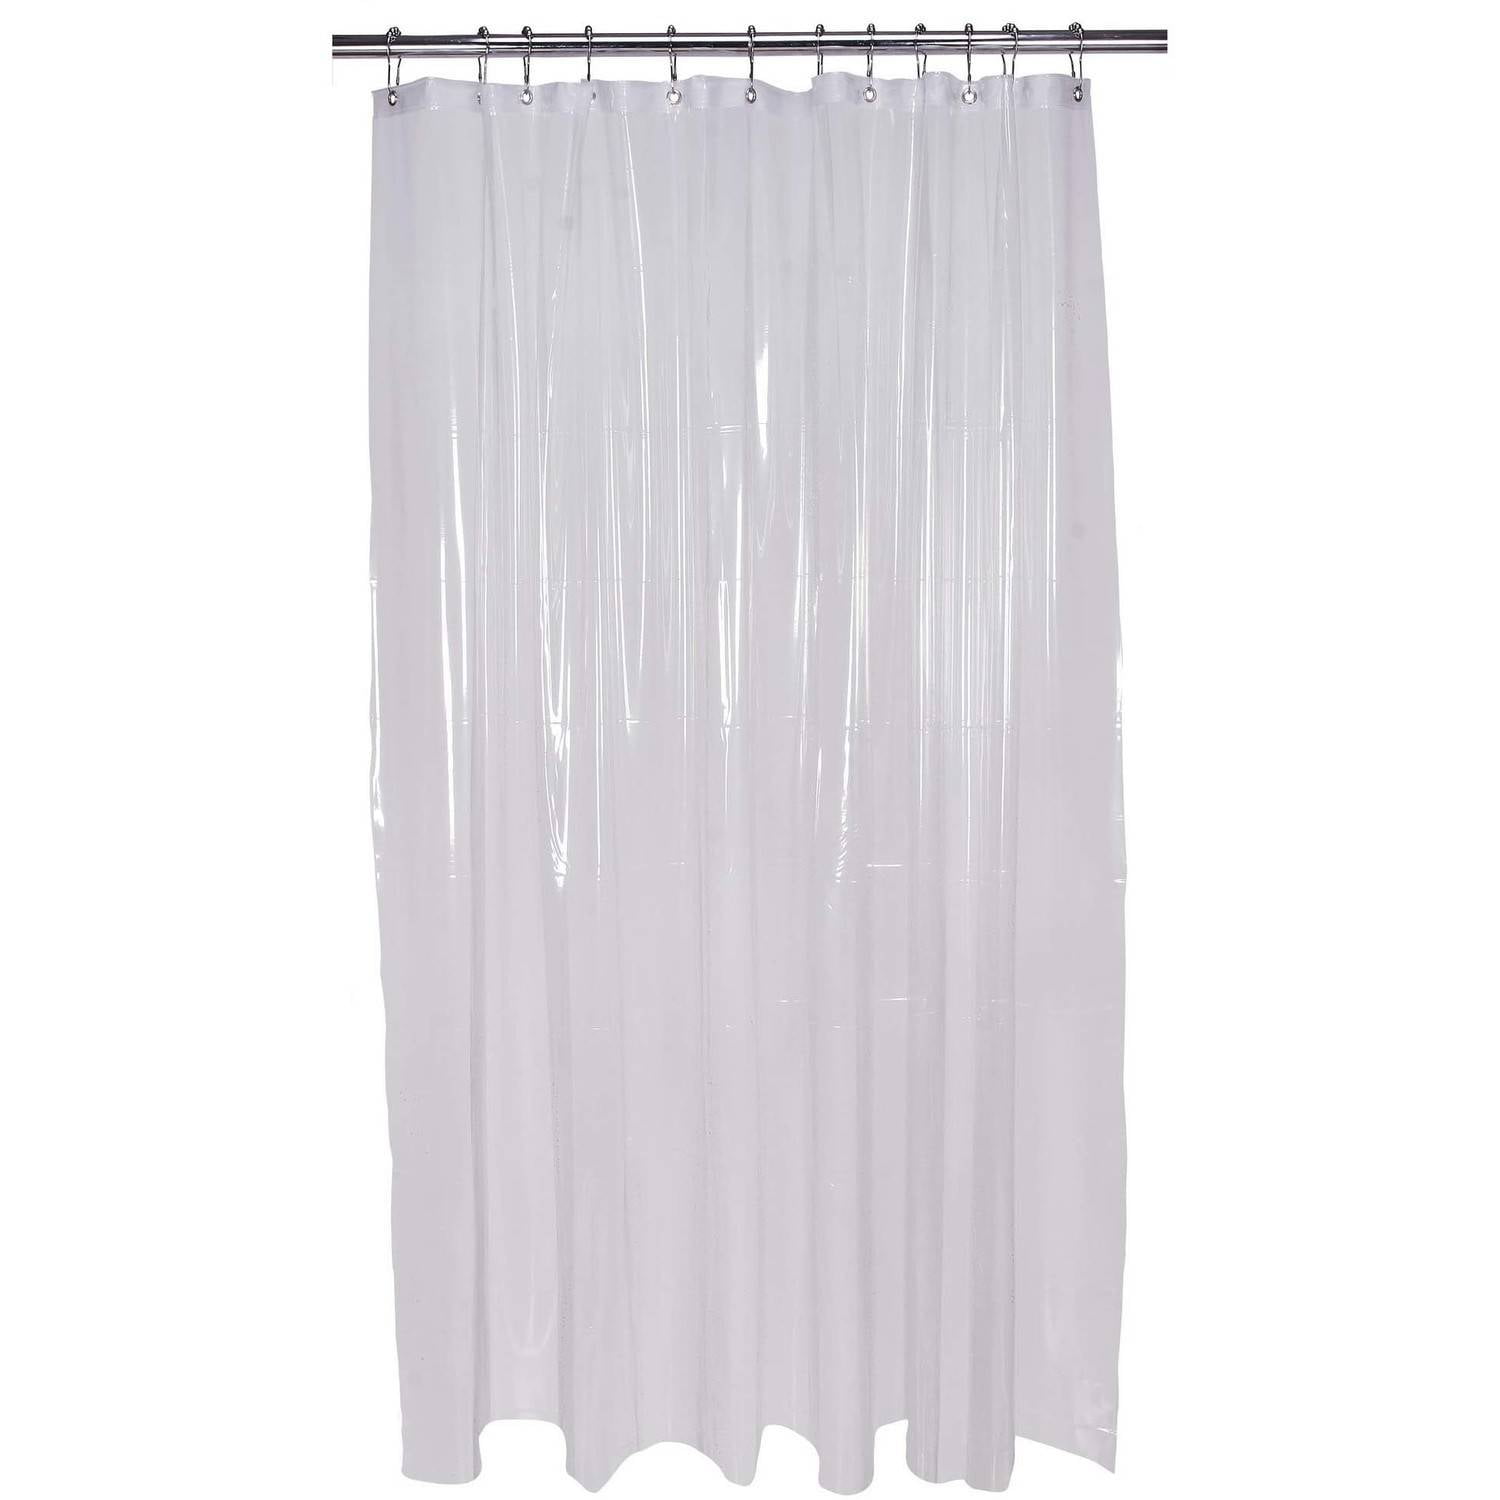 Bath Bliss Extra Long Shower Curtain, Extra Long Shower Curtain Liner 84 Clear